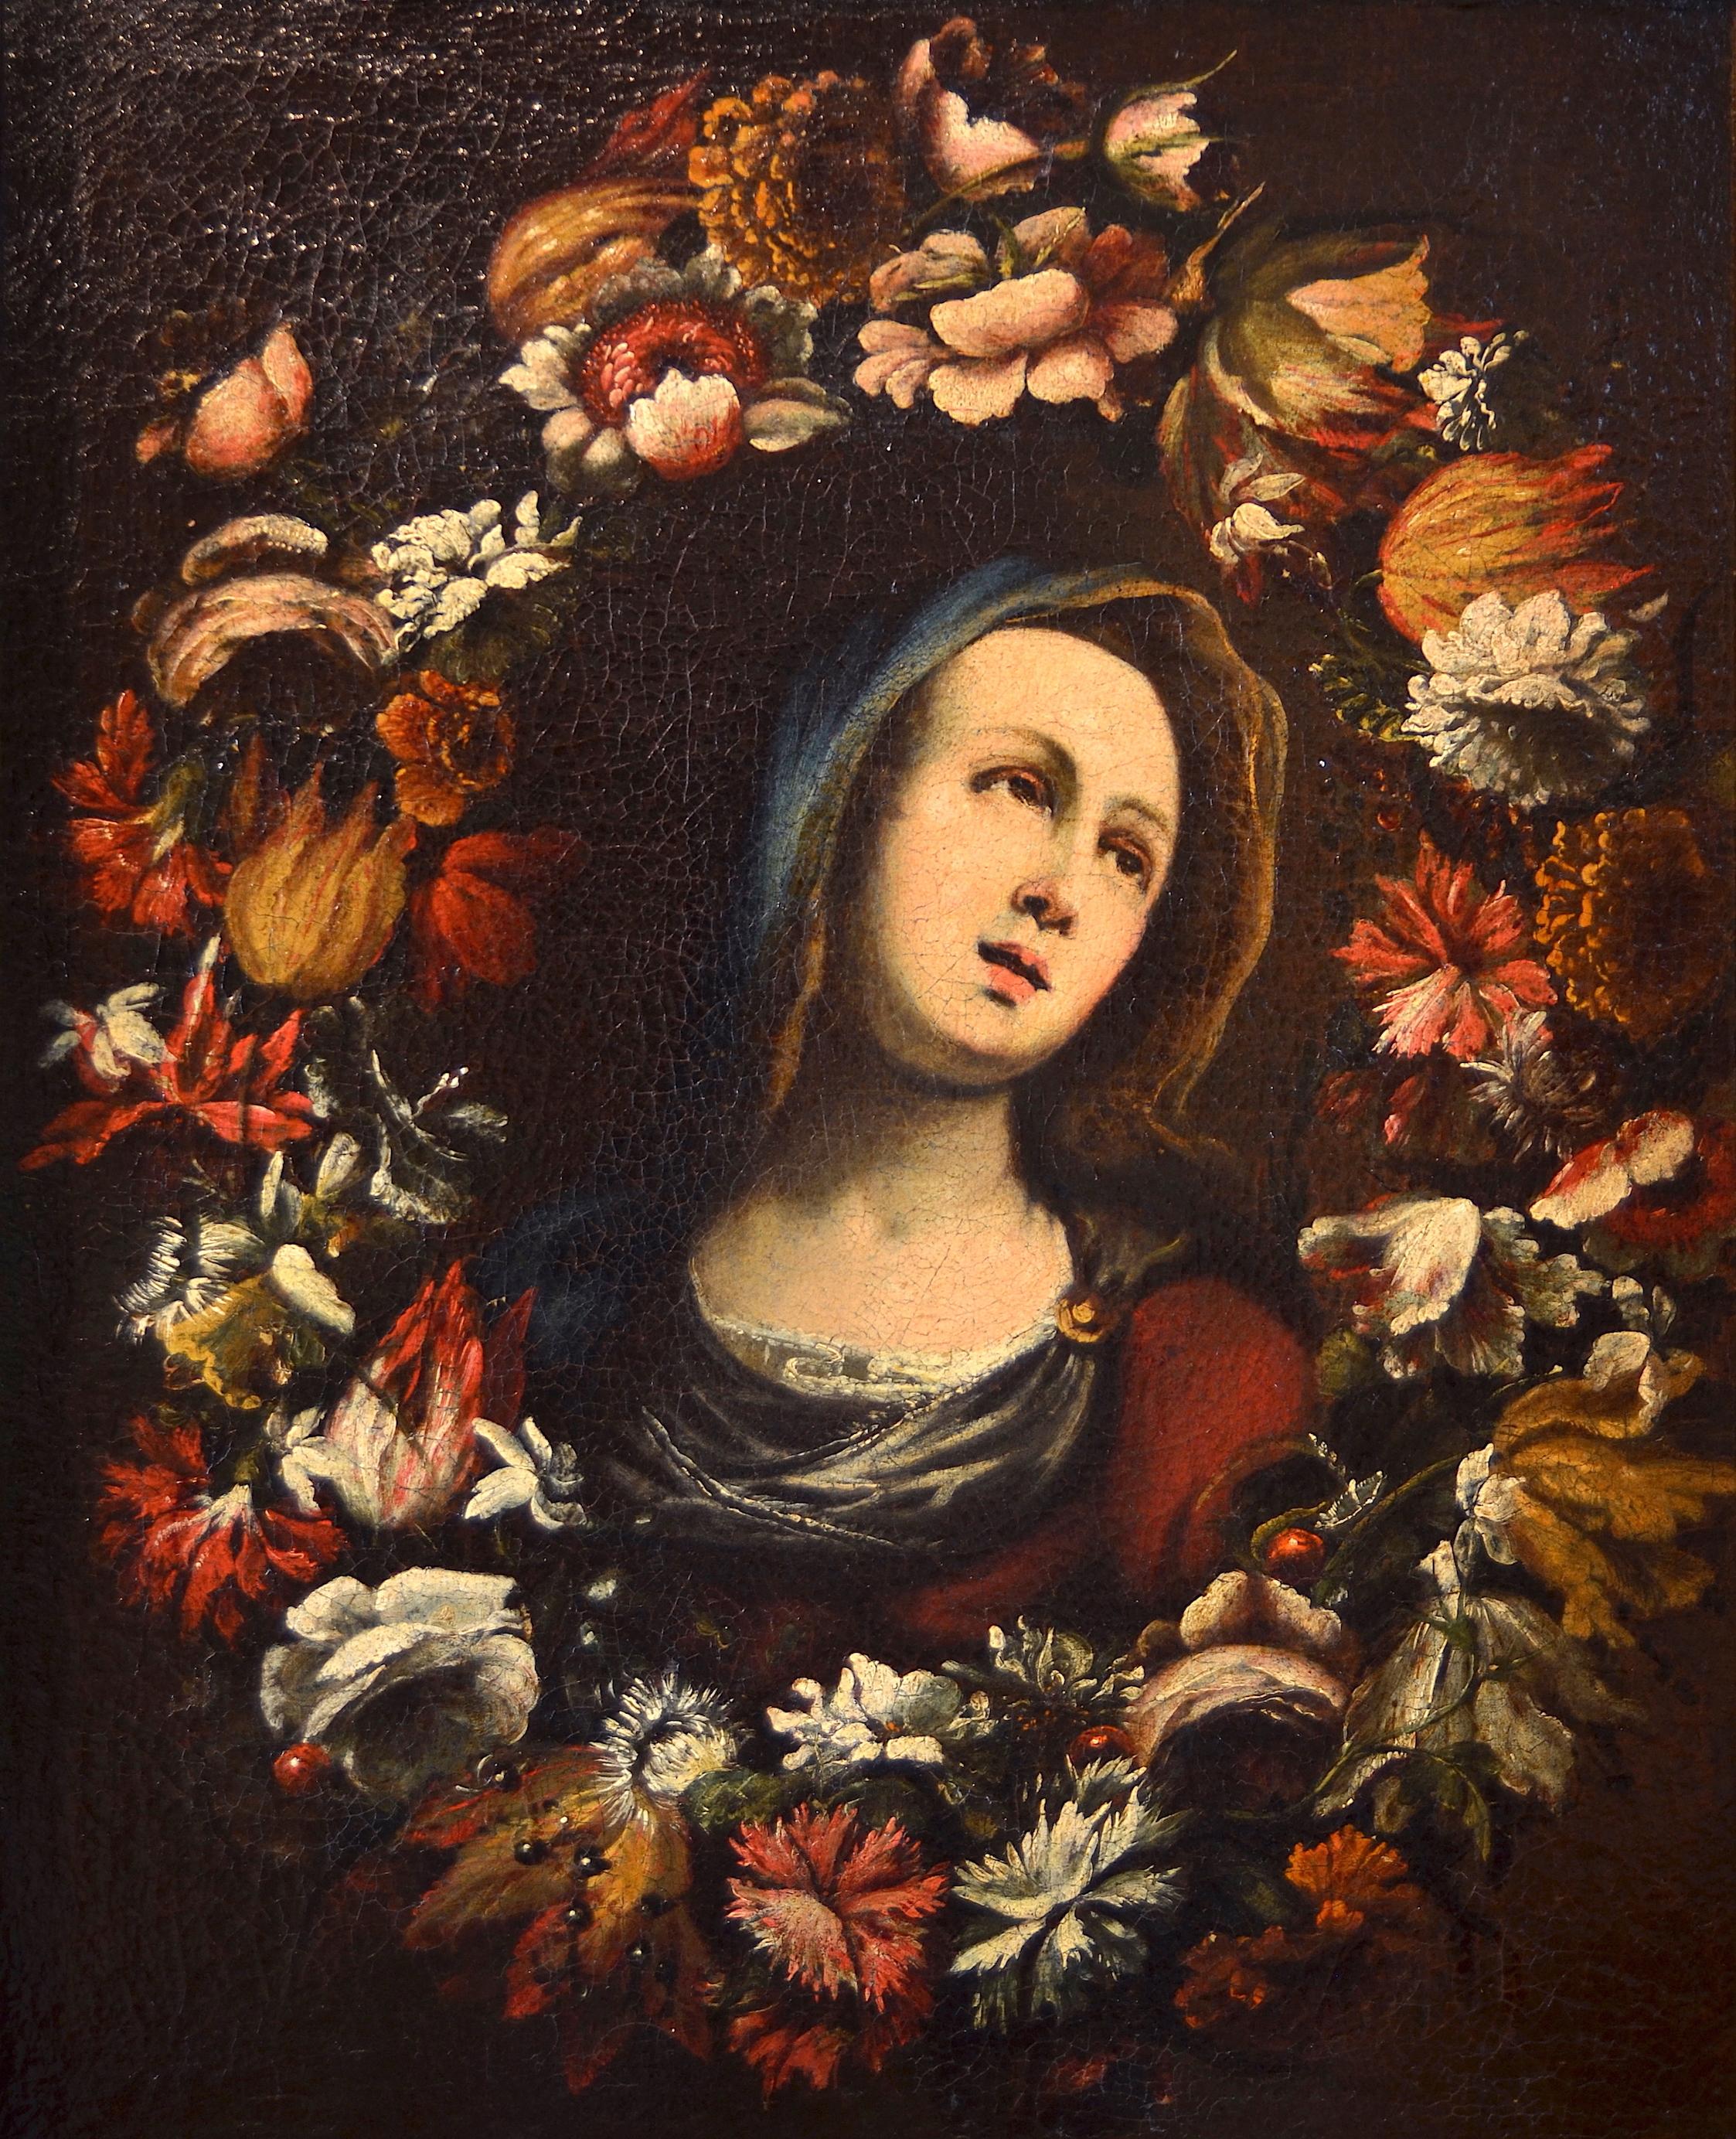 Flower Garland Virgin Paint Oil on canvas Old master 17th Century Italy - Painting by Giovanni Stanchi